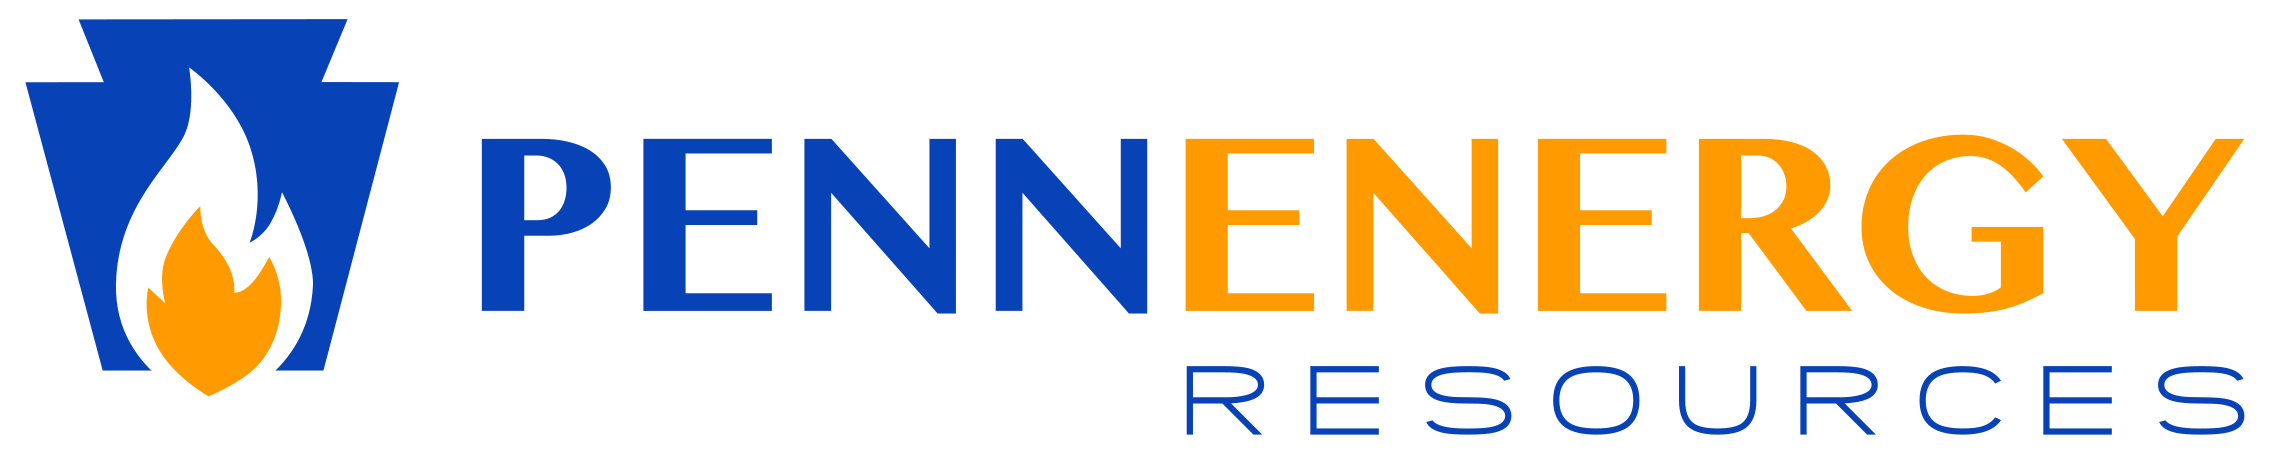 PennEnergy Resources Company Logo